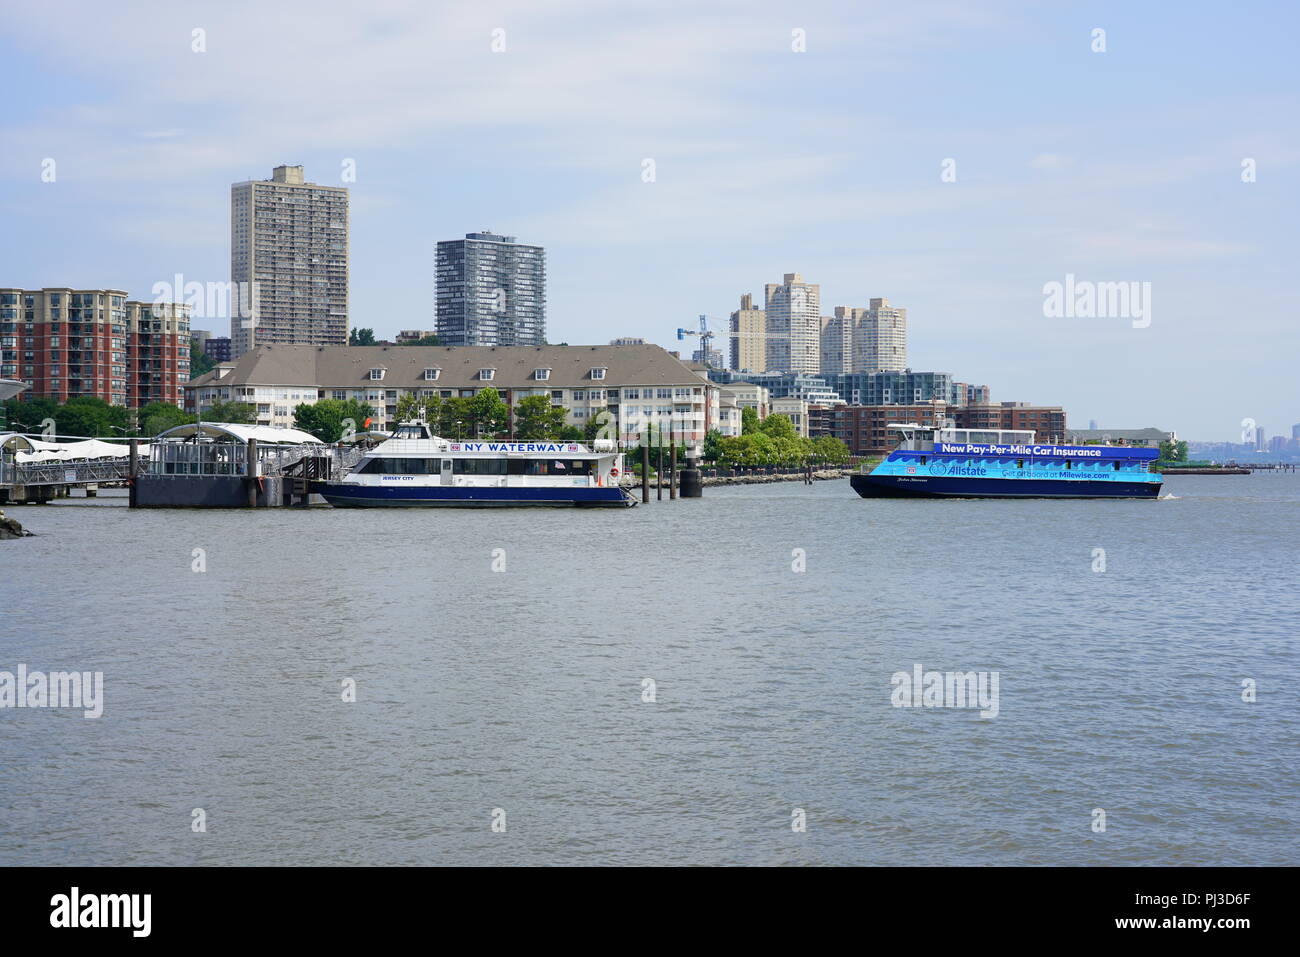 View of the NY Waterway ferry terminal at Port Imperial in Weehawken, a transit hub on the waterfront of the Hudson River in New Jersey Stock Photo